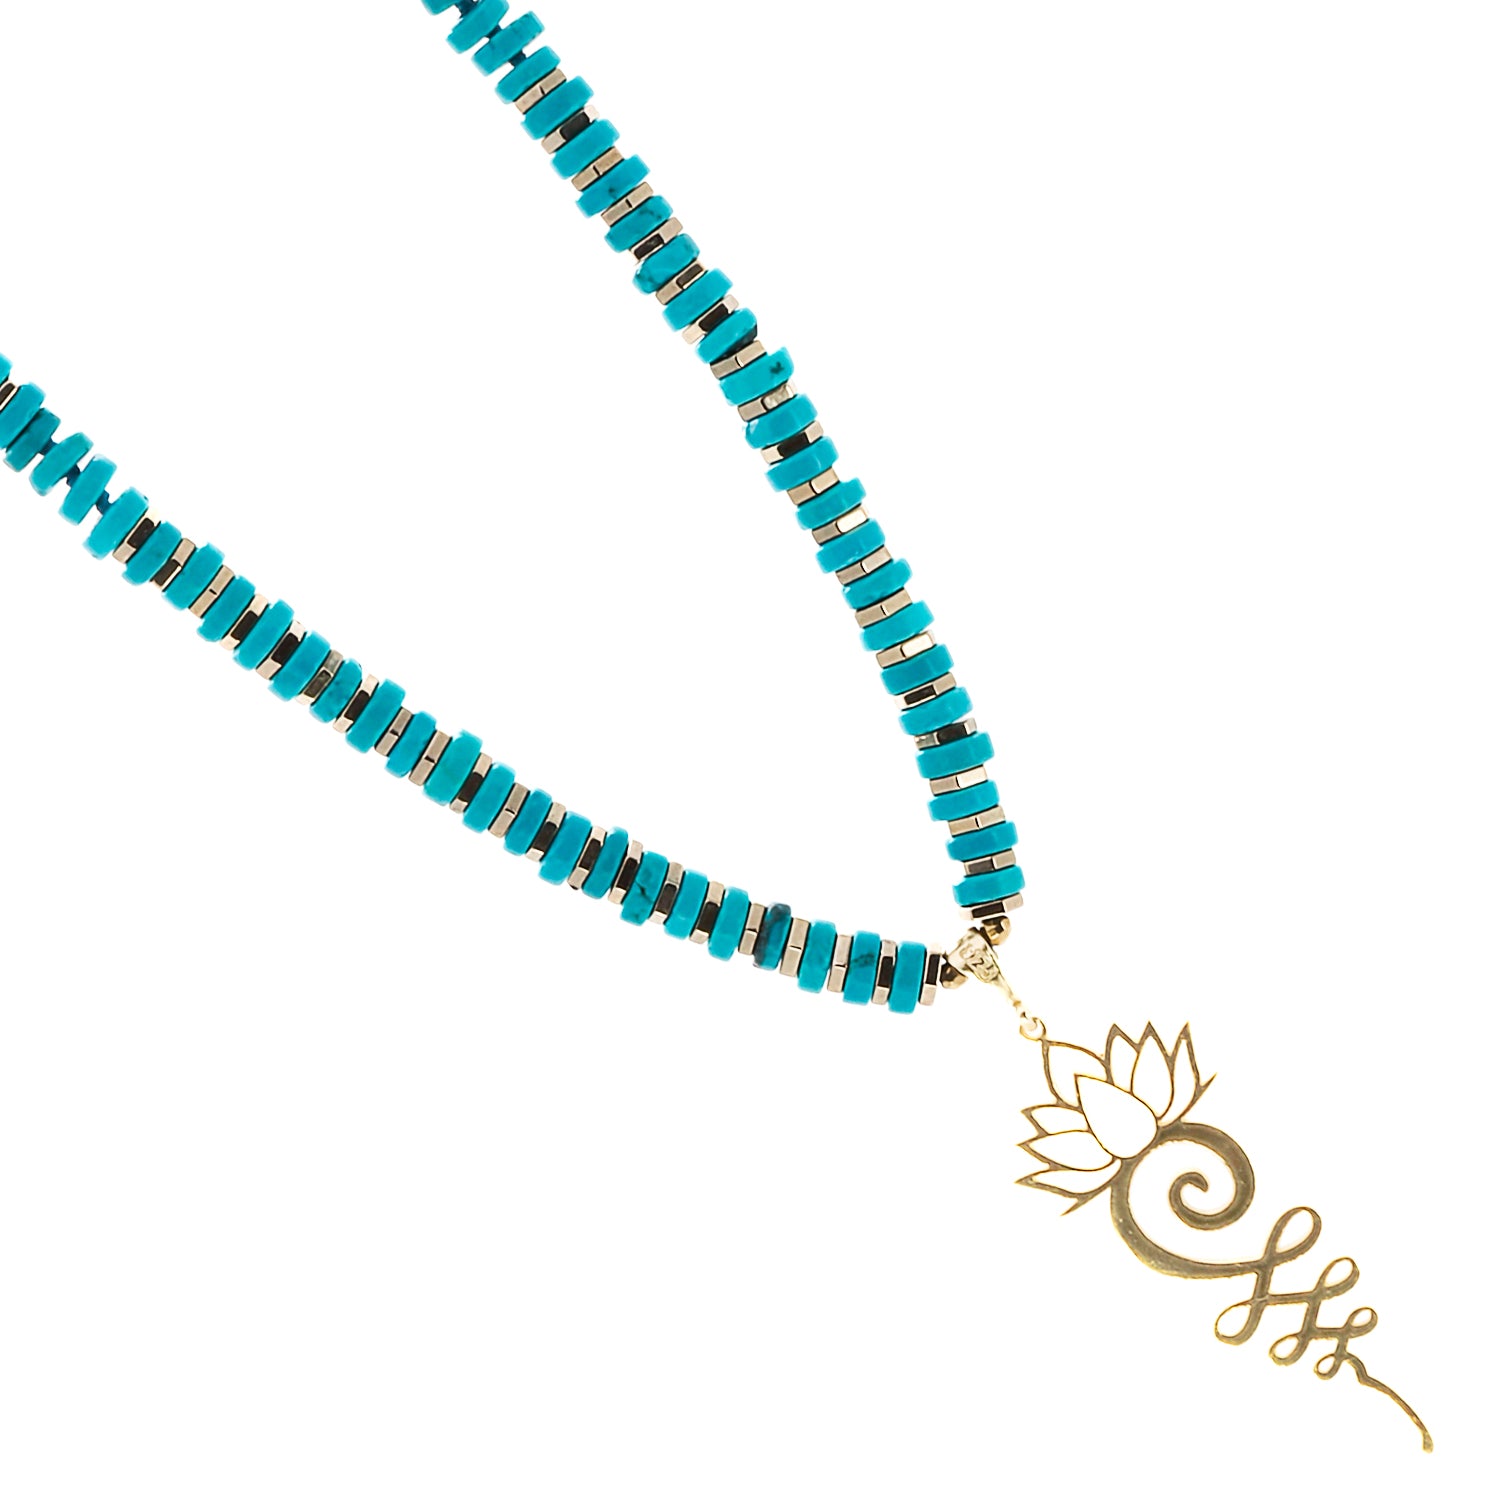 The intricate craftsmanship of the Unalome Pendant on the Turquoise Unalome Serenity Necklace